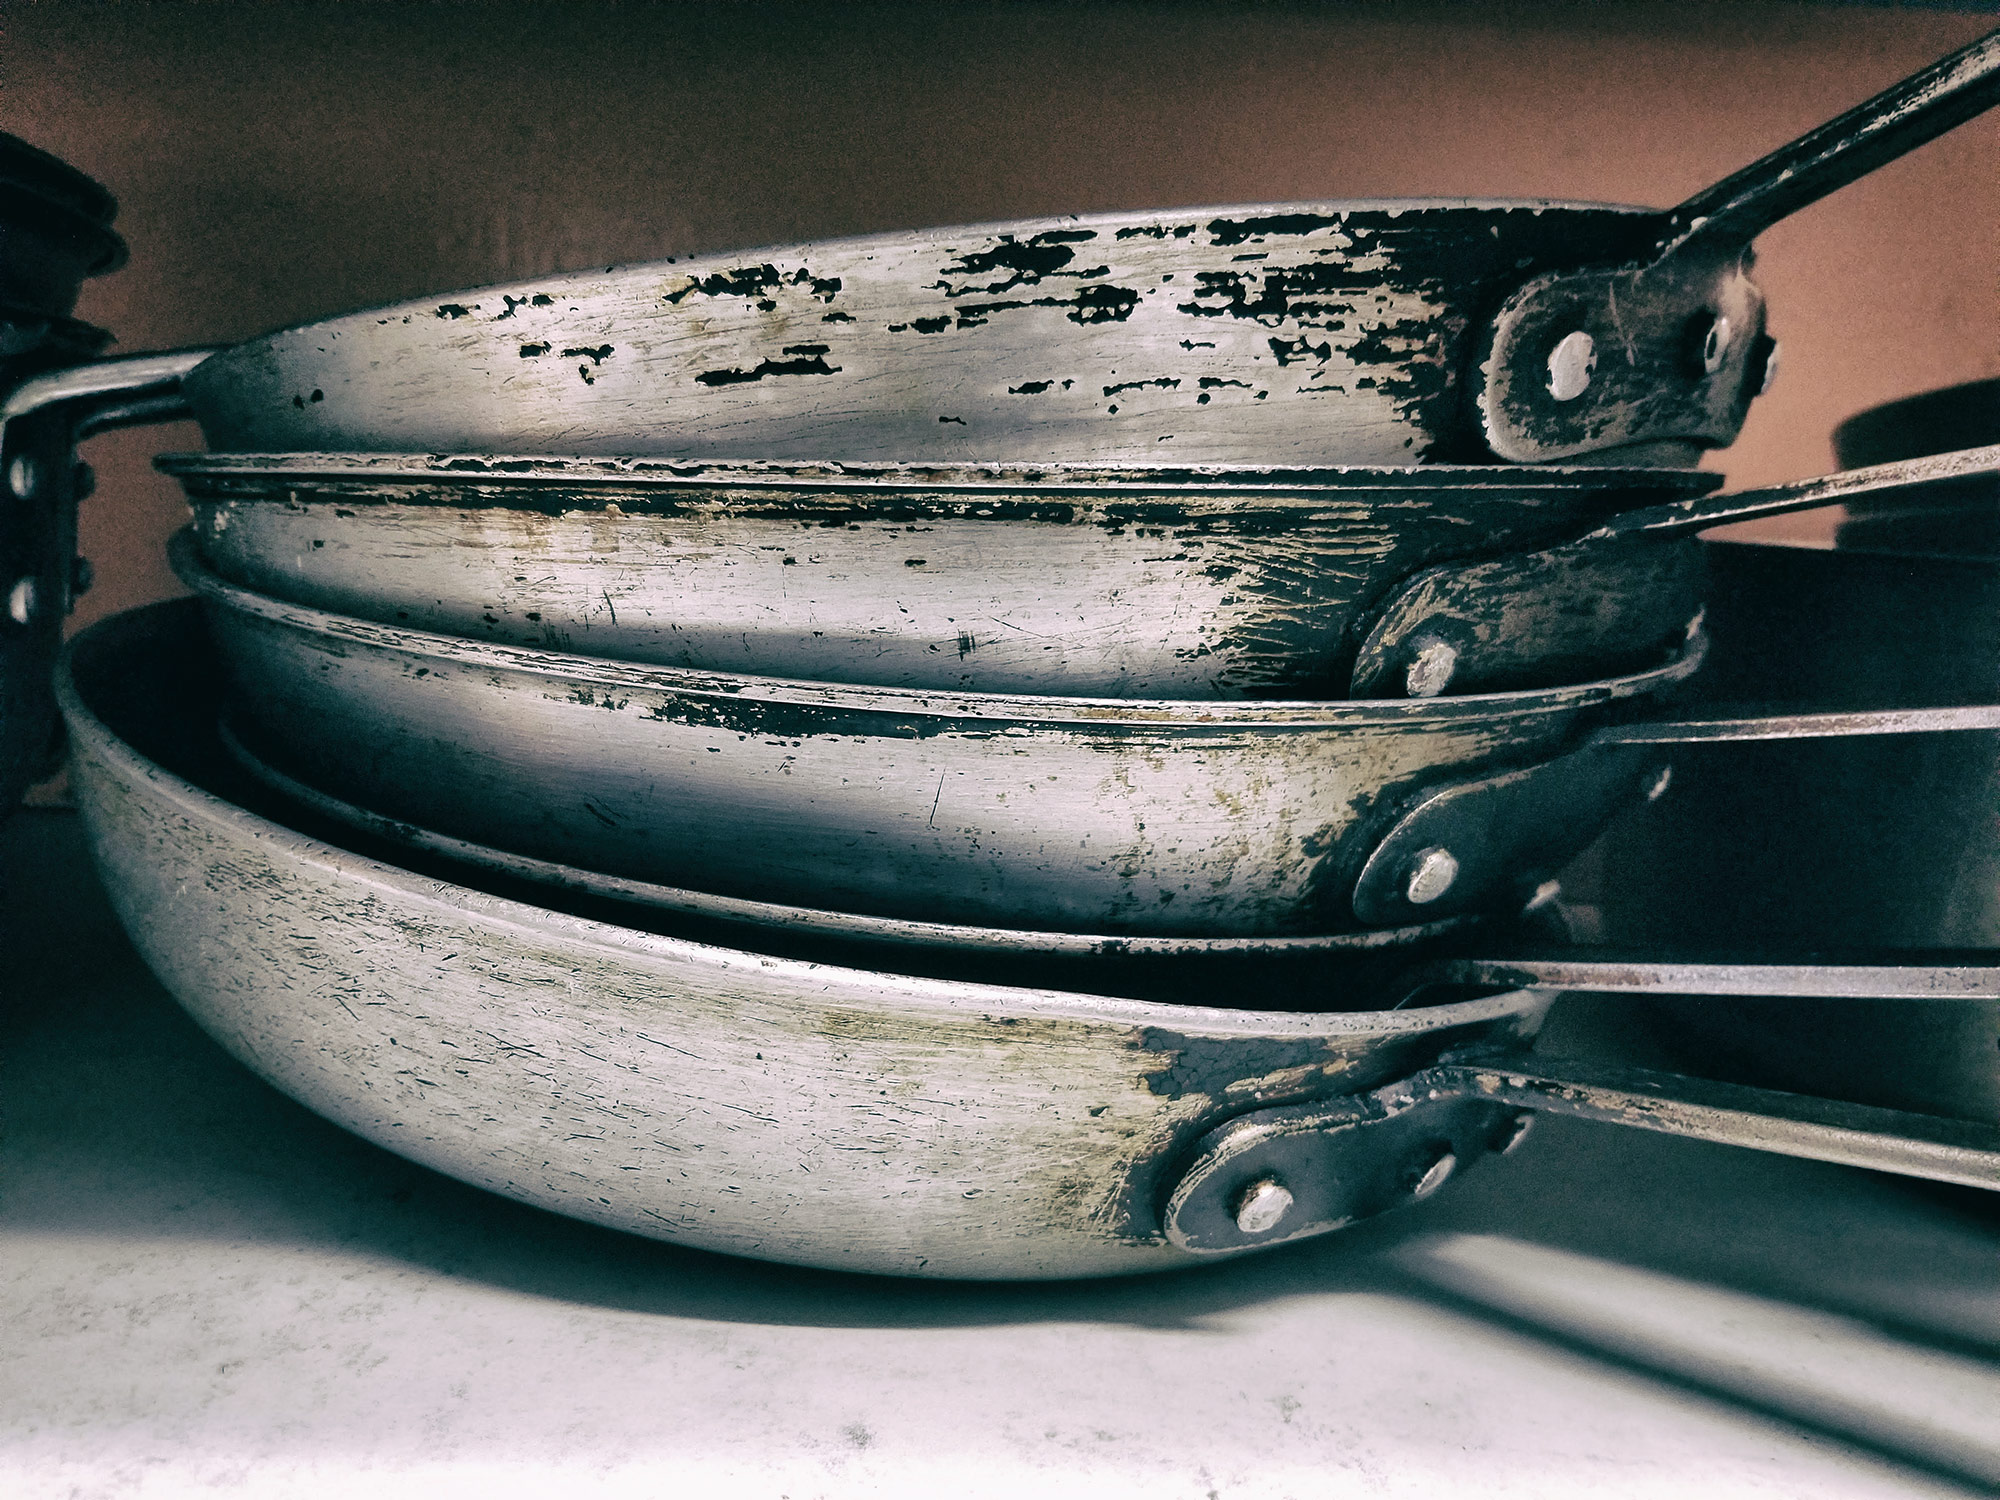  sautee pans ©2018 by bret wills